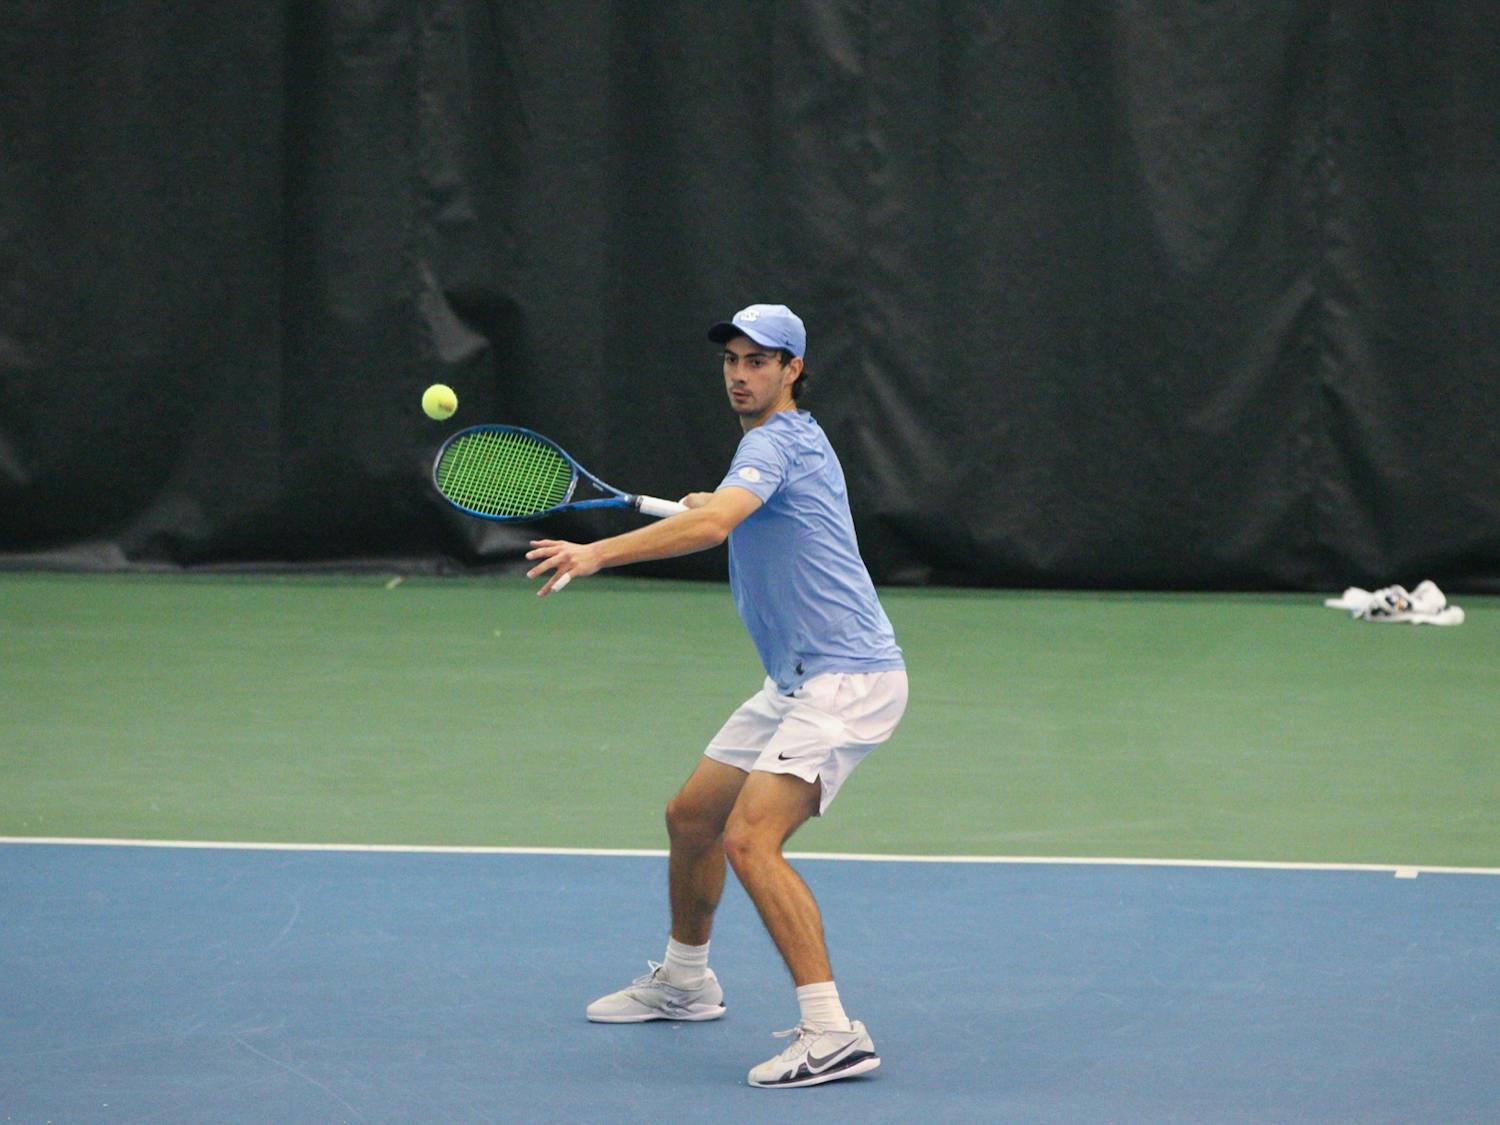 UNC sophomore Logan Zapp returns a volley during the Tar Heels’ 4-2 victory over South Carolina in the Cone-Kenfield Tennis Center on Feb. 13, 2022.